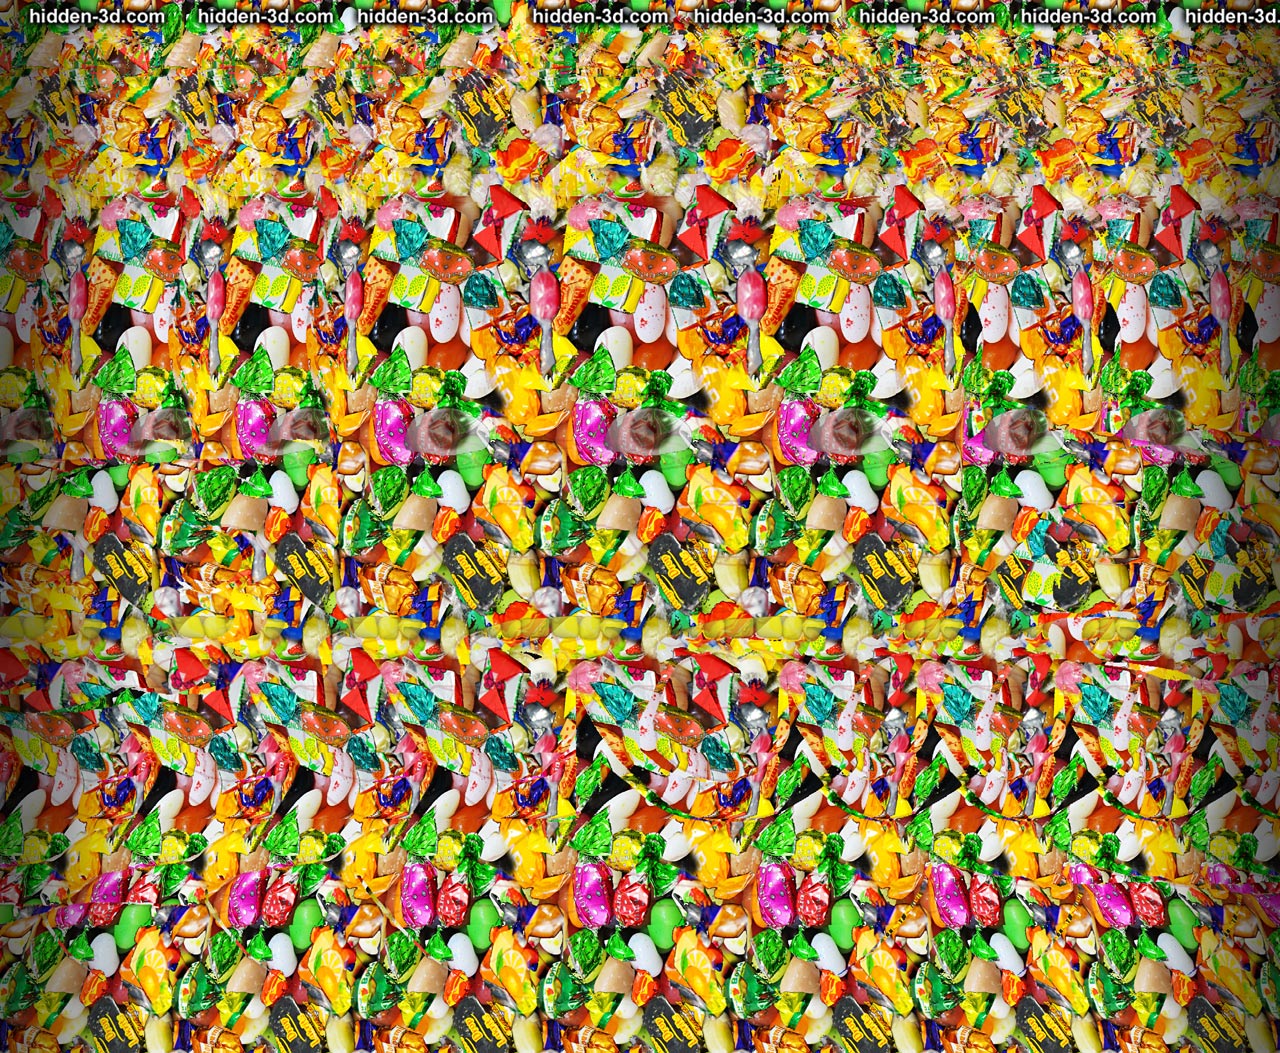 Stereogram by 3Dimka: April fool Crosseyed version. Tags: boy face tongue funny silly, hidden 3D picture (SIRDS)